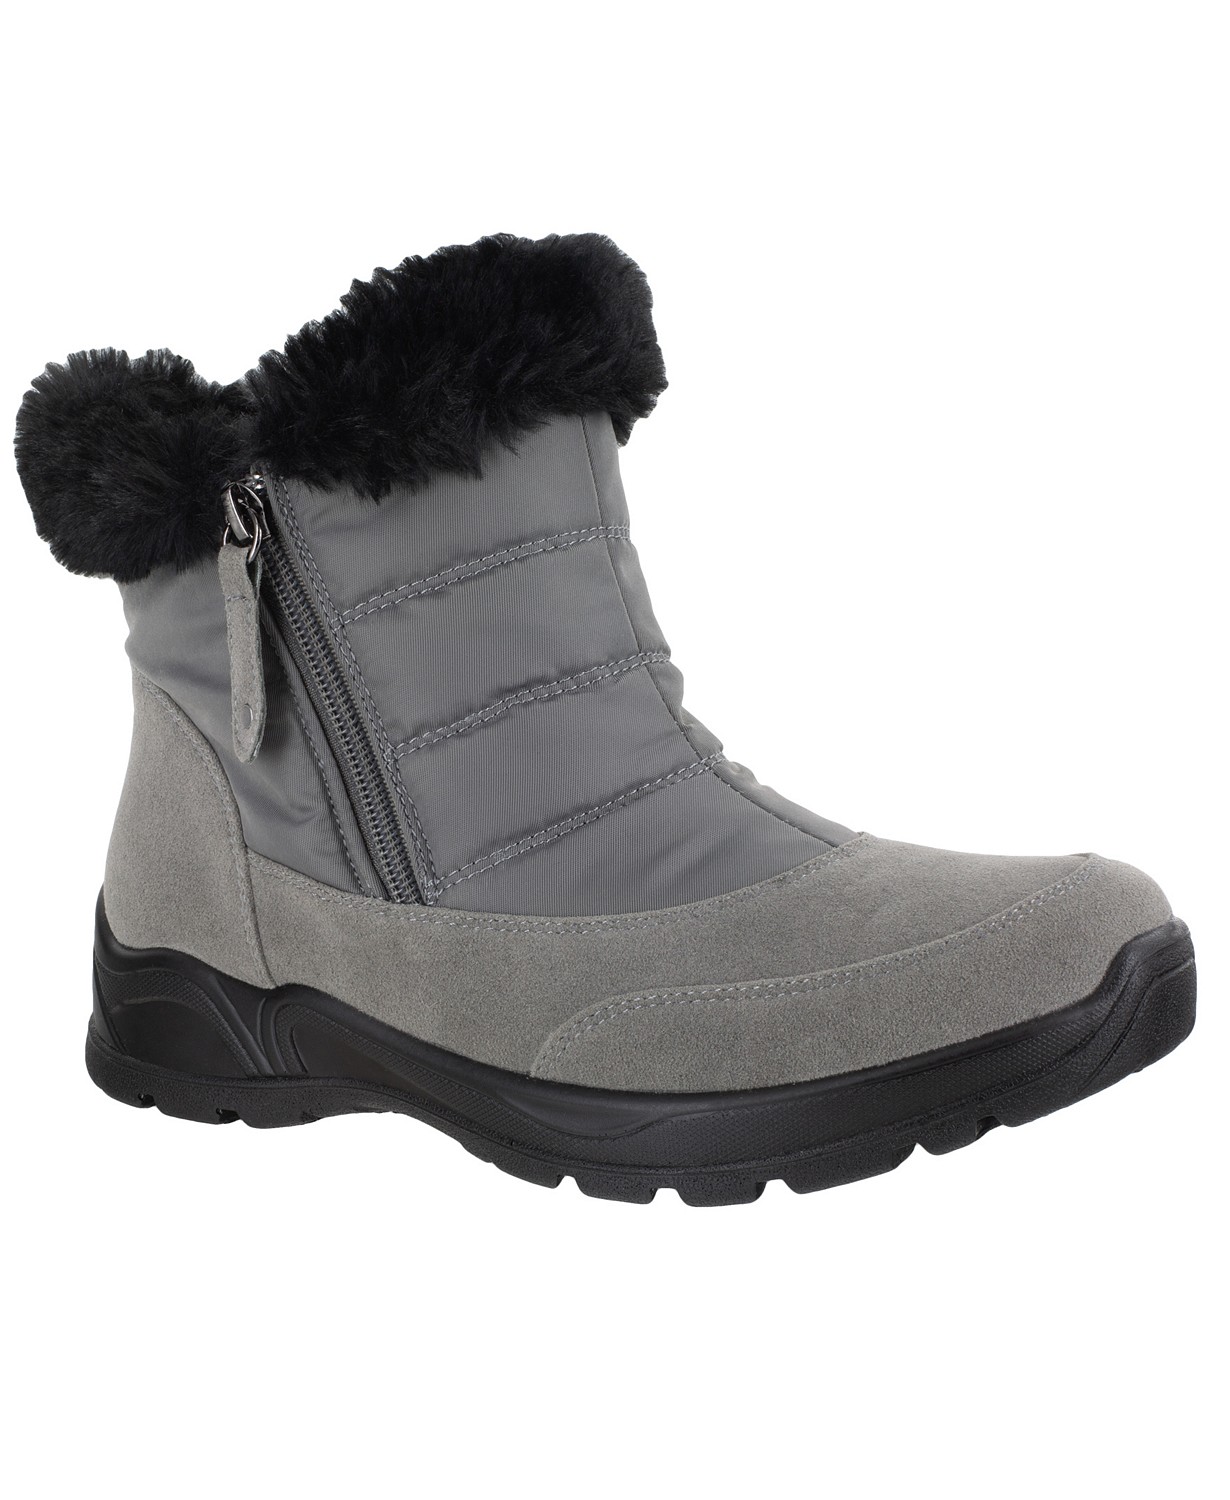 www.couturepoint.com-easy-street-womens-black-easy-dry-by-cuddle-waterproof-boots-copy